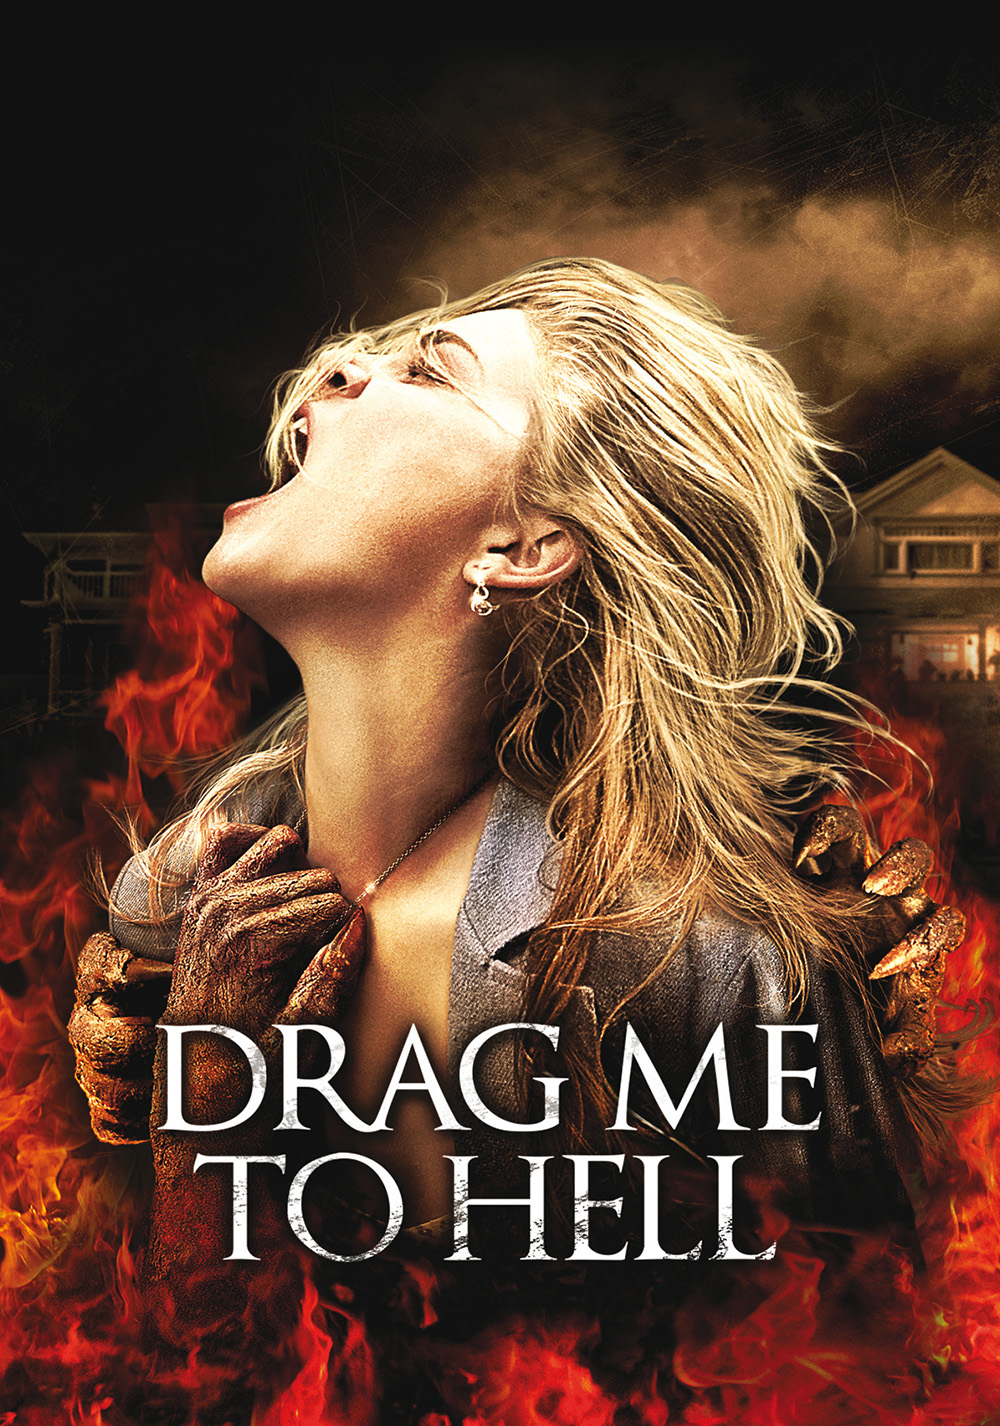 Drag Me To Hell wallpaper, Movie, HQ Drag Me To Hell pictureK Wallpaper 2019